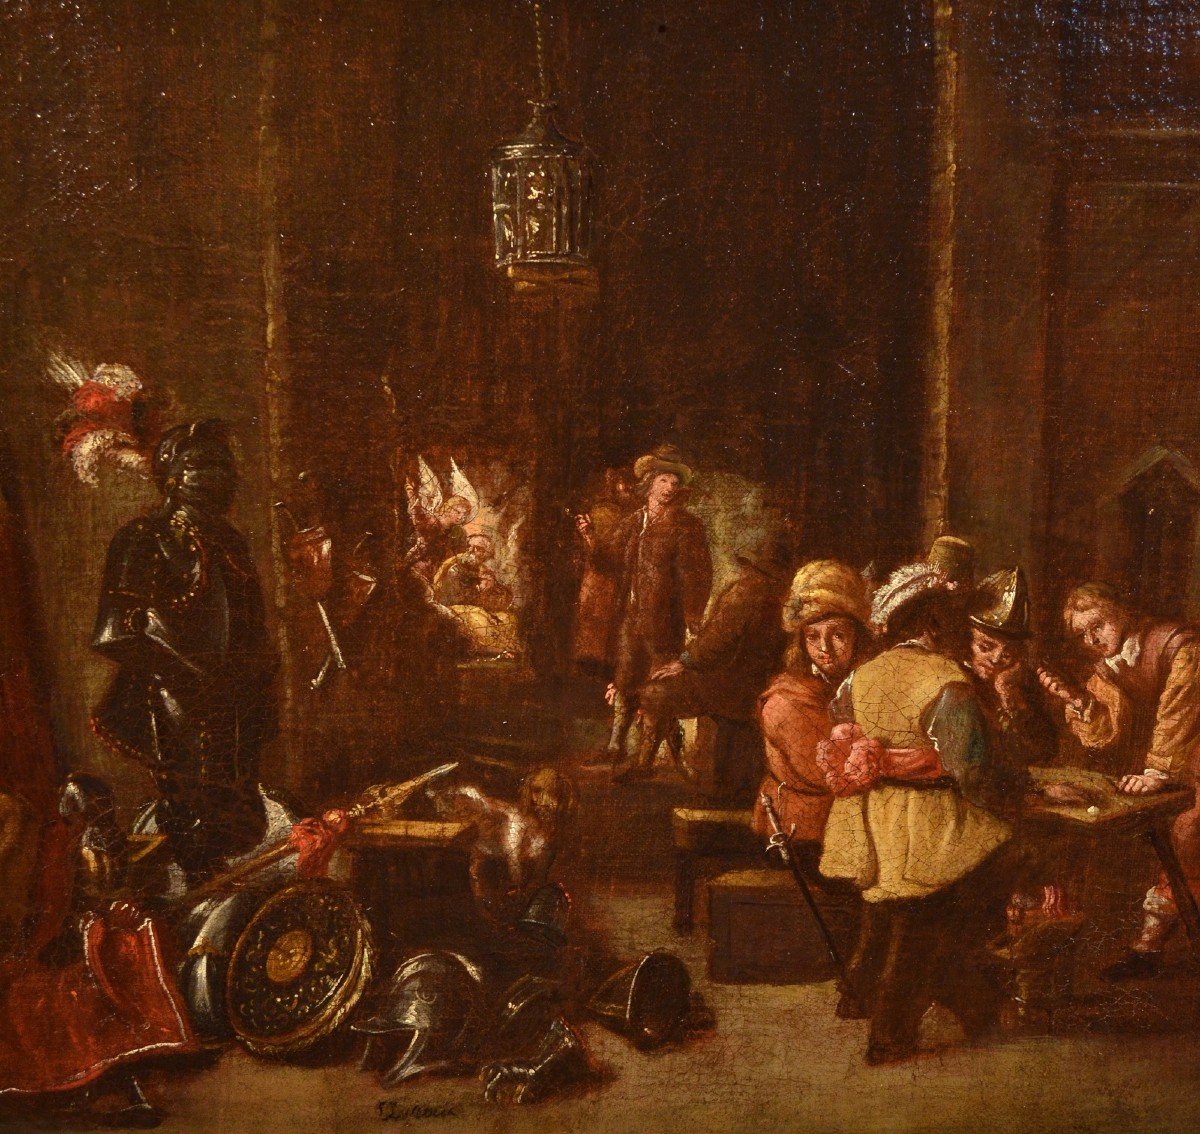 Guardhouse With Soldiers At Rest, David Teniers (antwerp 1610 - Brussels 1690), Workshop-photo-4